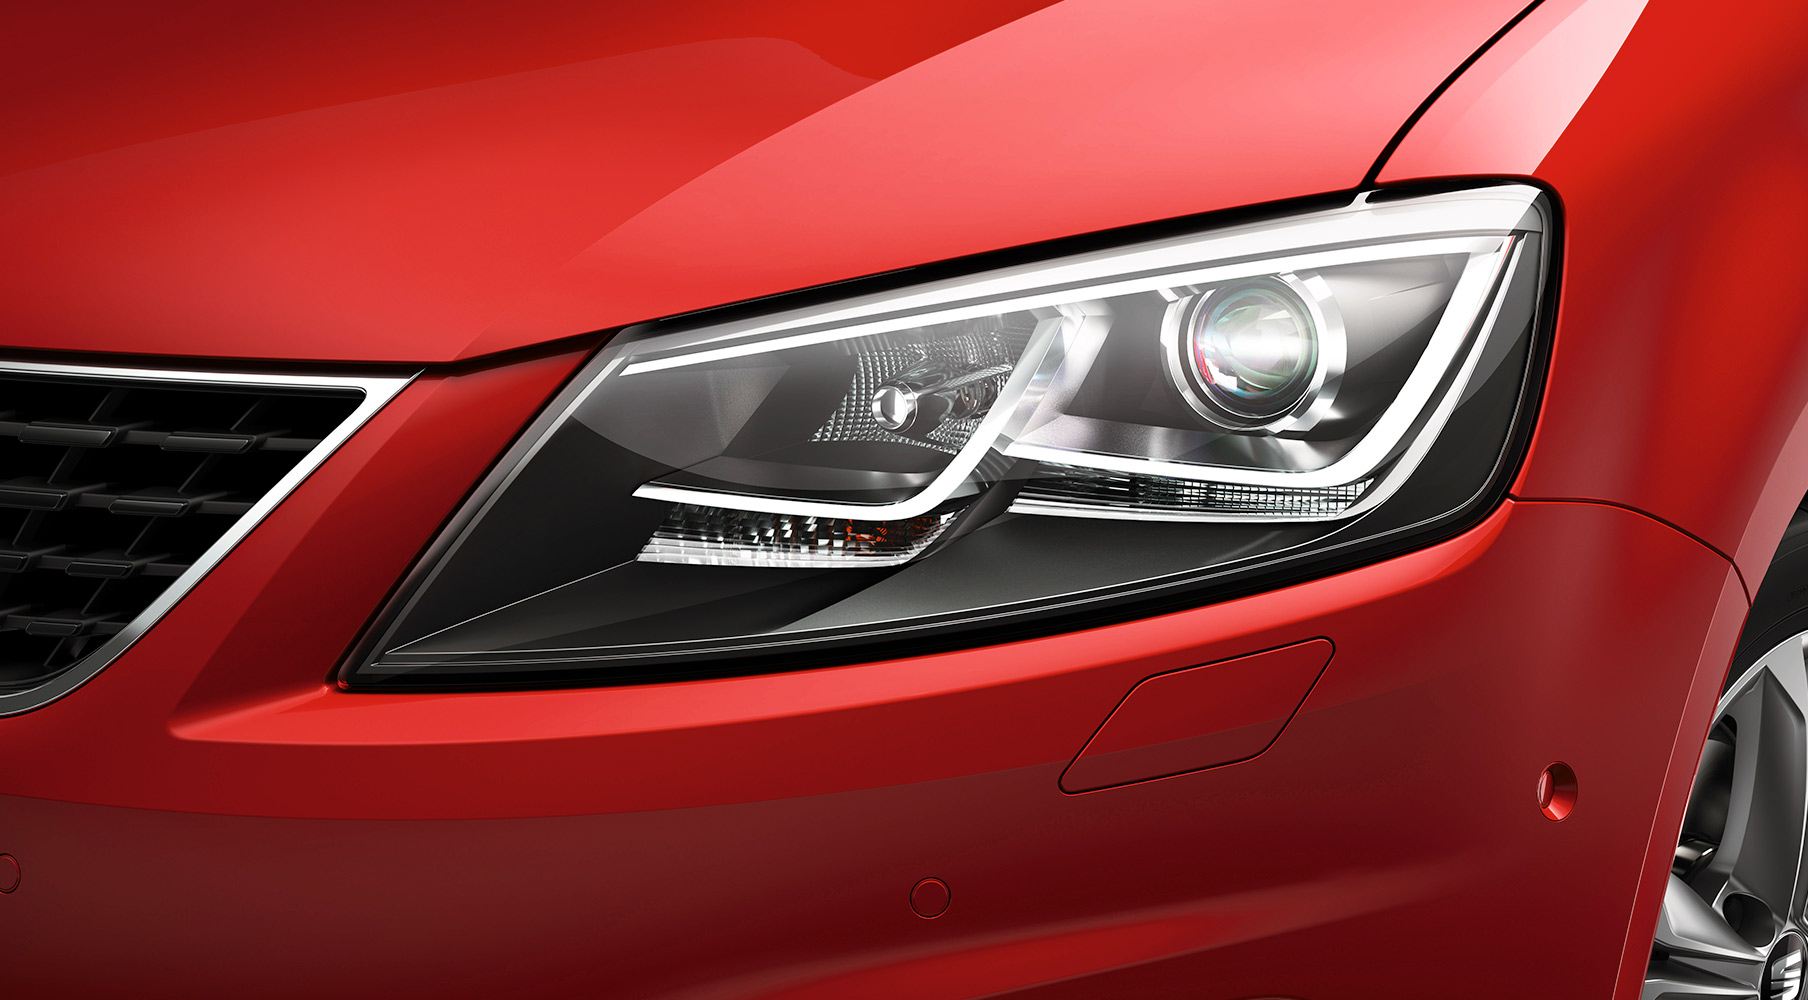 SEAT Adaptive front lighting system